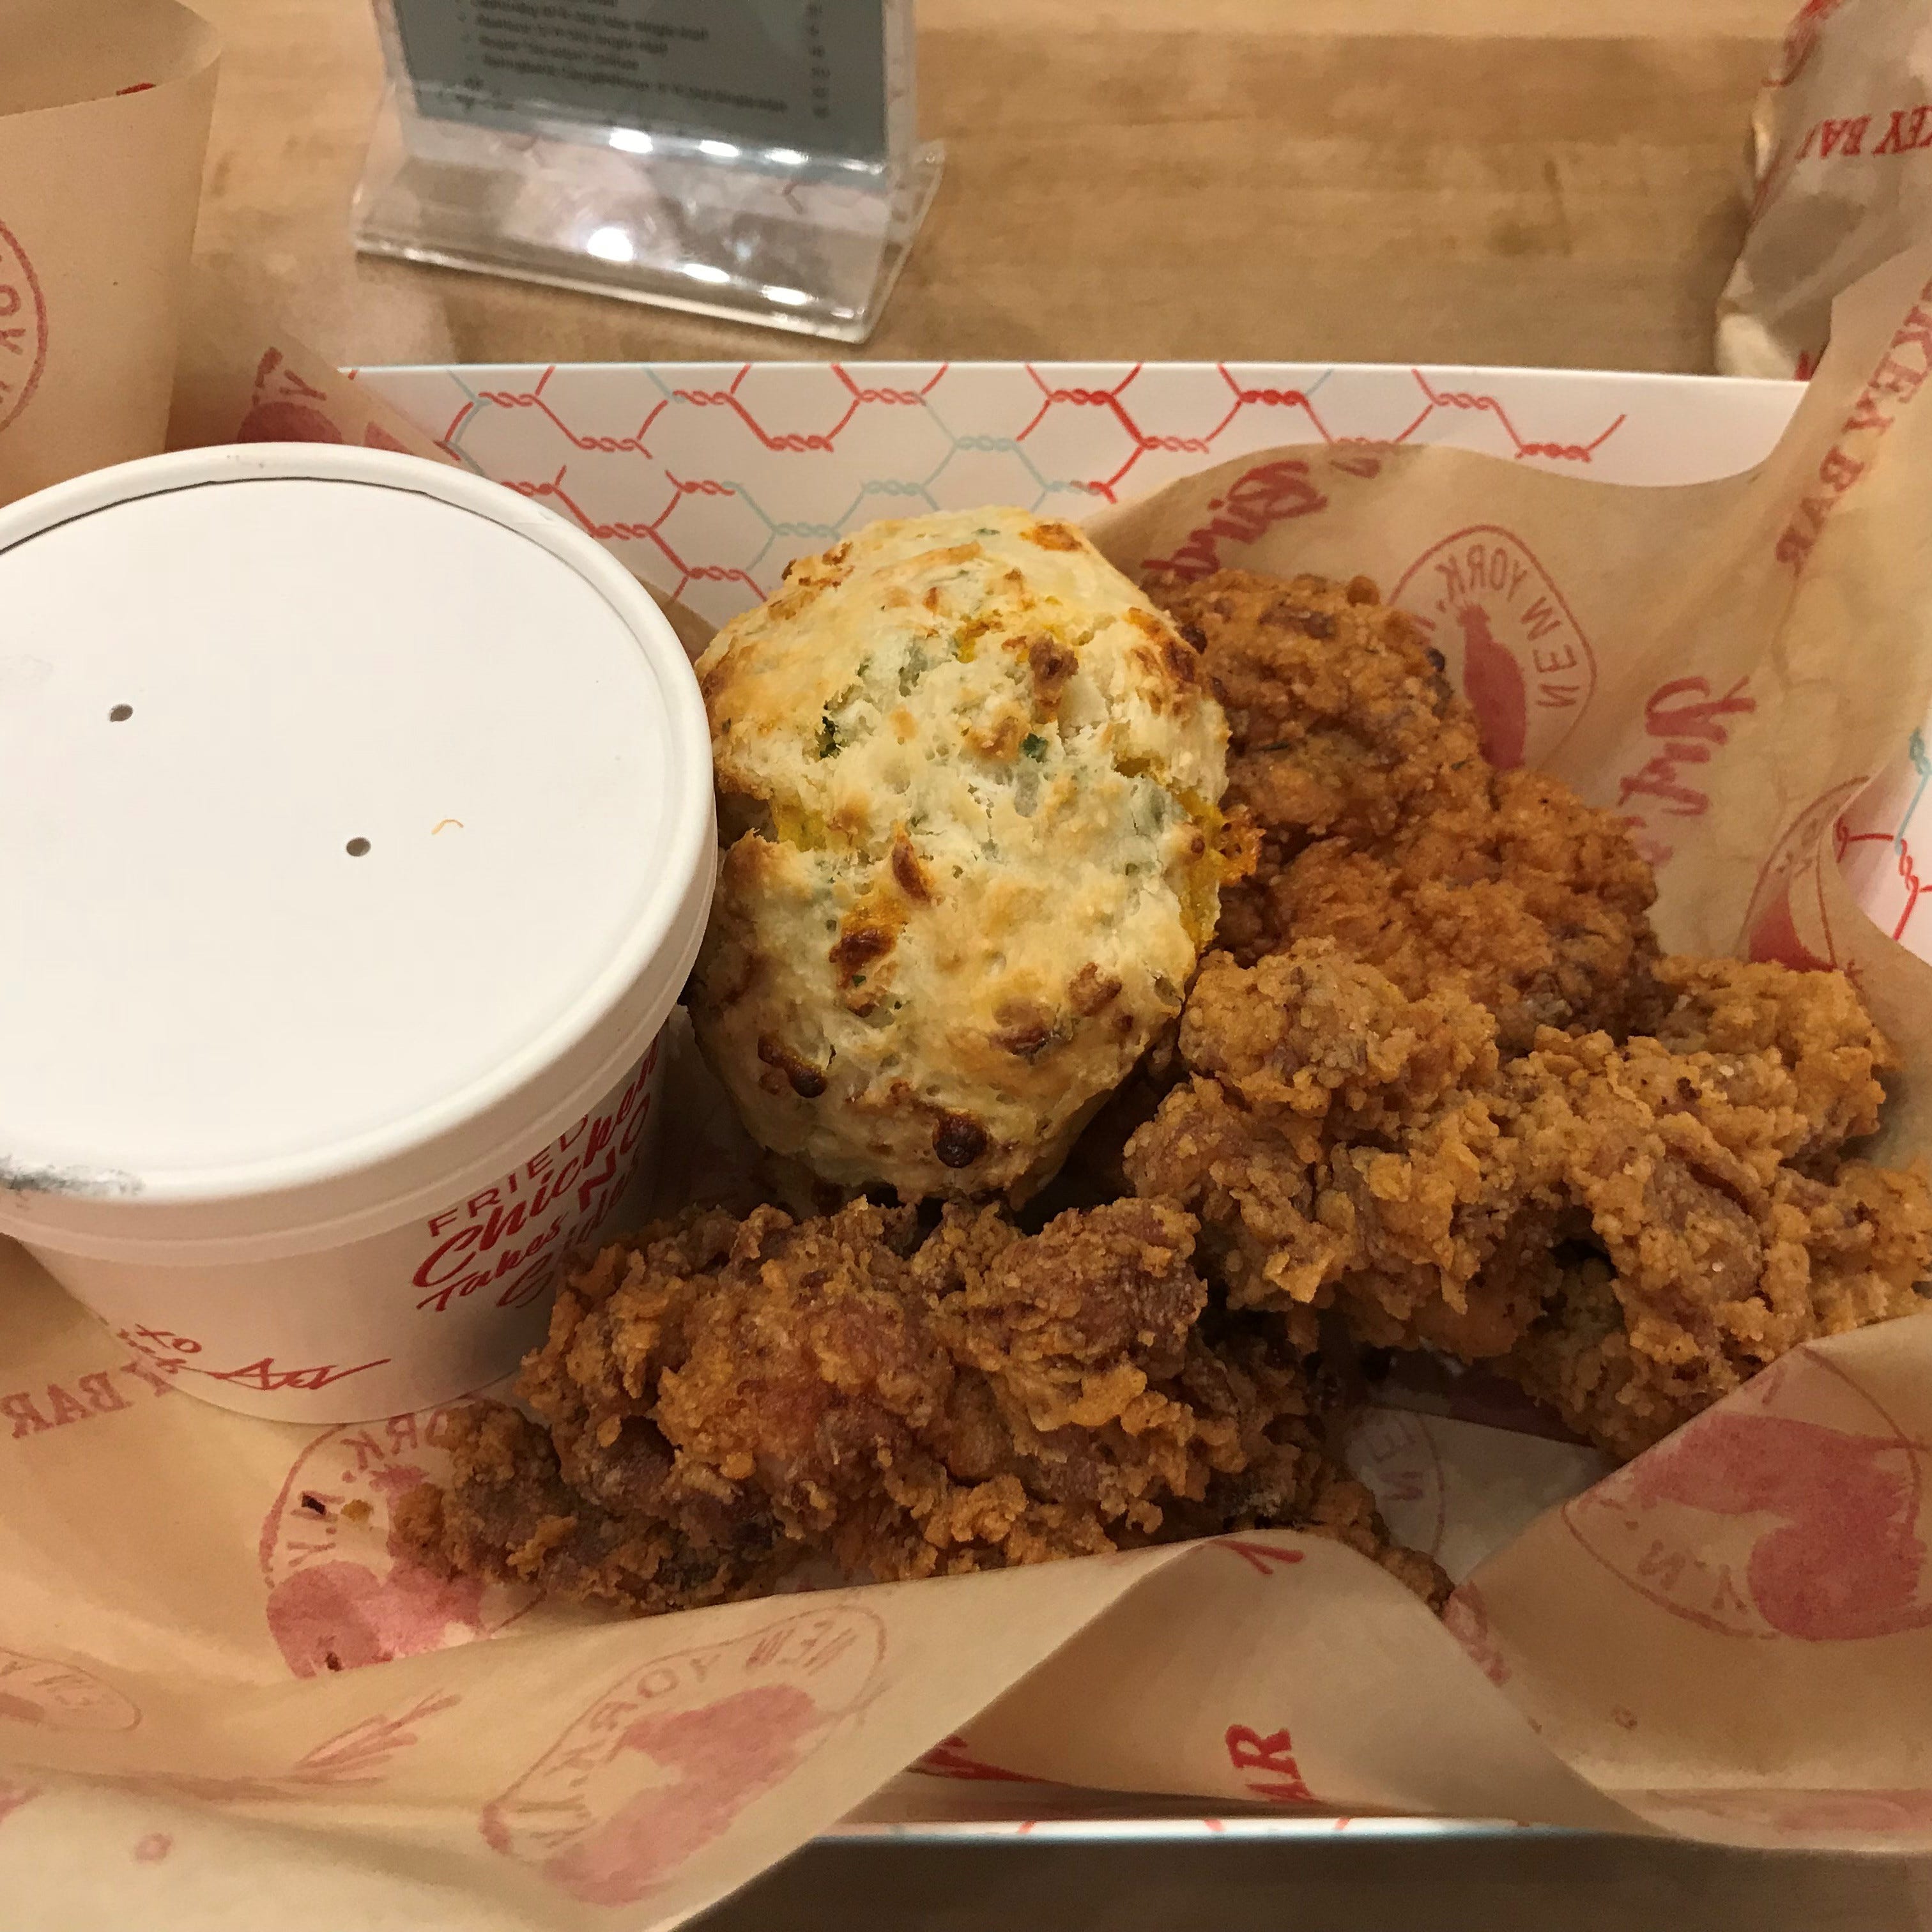 The signature dish is Chef Art's Mix Box, a two-piece serving of light and dark meat fried chicken with a biscuit and choice of side.